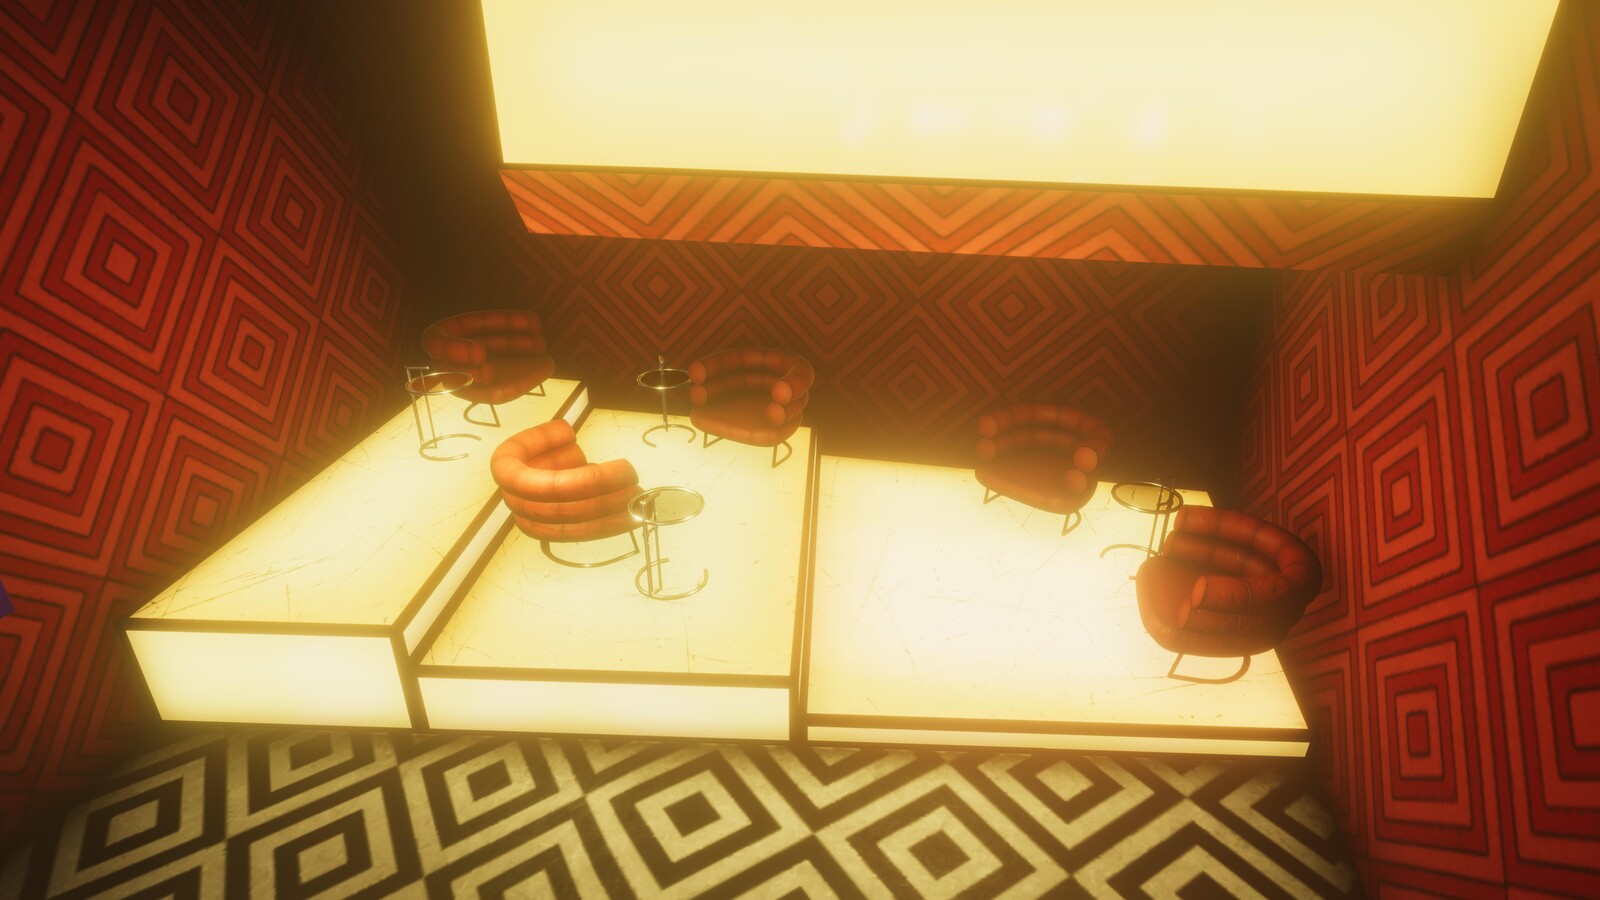 I put Eileen Gray's furniture on the bright platforms to tie together this 1920's styled room with the disco aesthetic in the rest of the club.